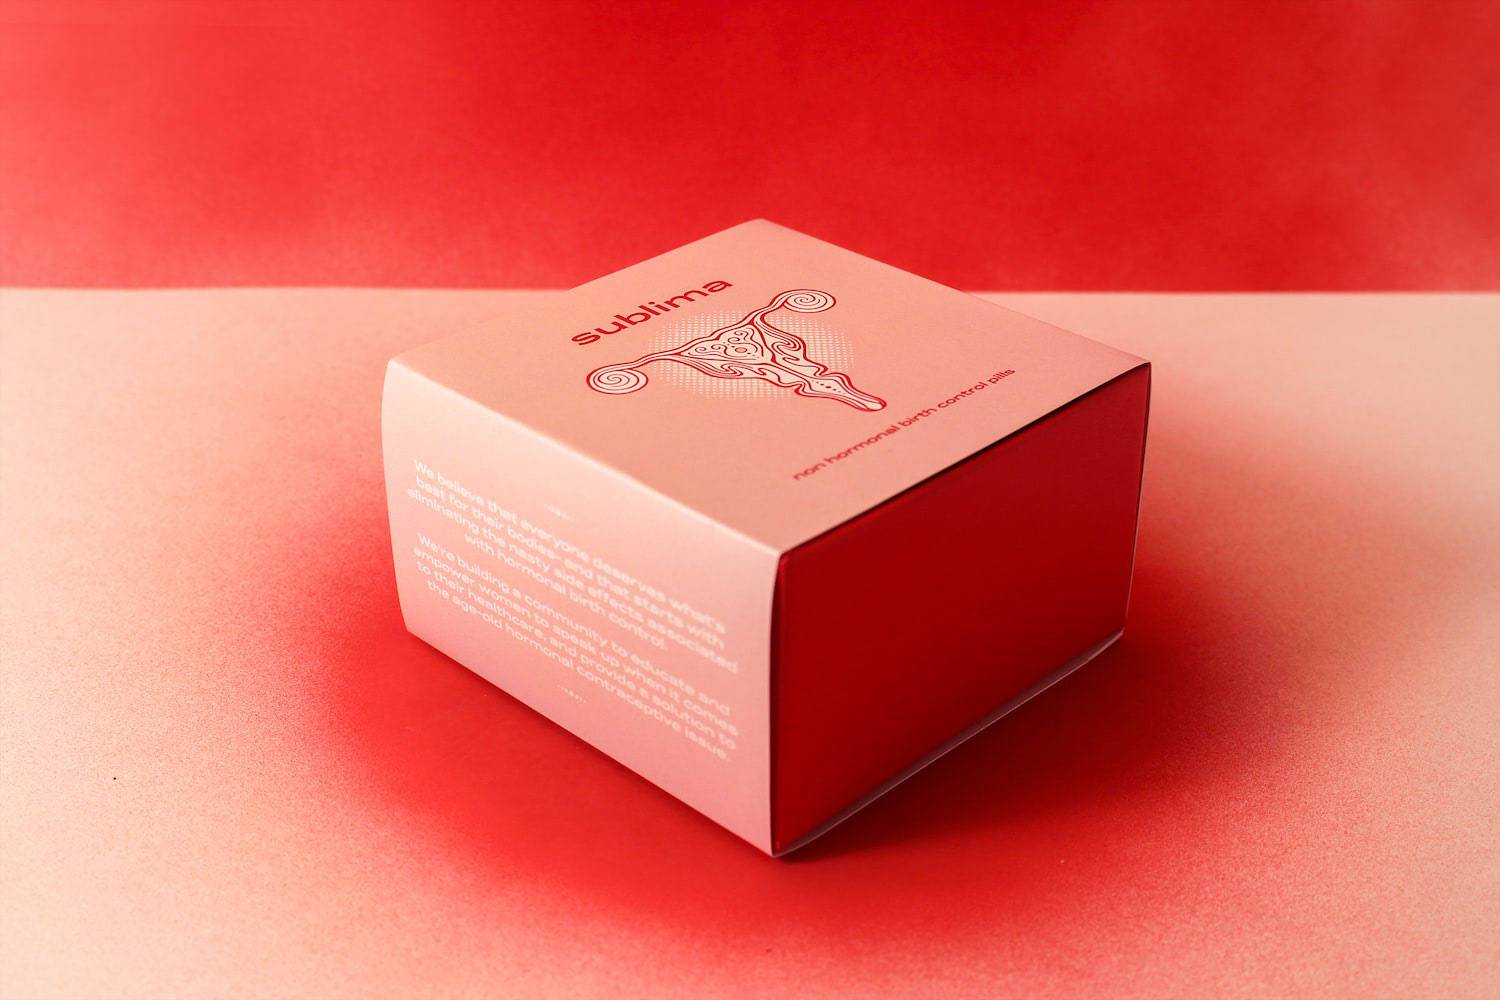 A side-on photo of Sublima's packaging box placed on a spray-painted red backdrop. The packaging consists of a light pink sleeve covering a red box. The top face of the sleeve shows Sublima's uterus logo with the words 